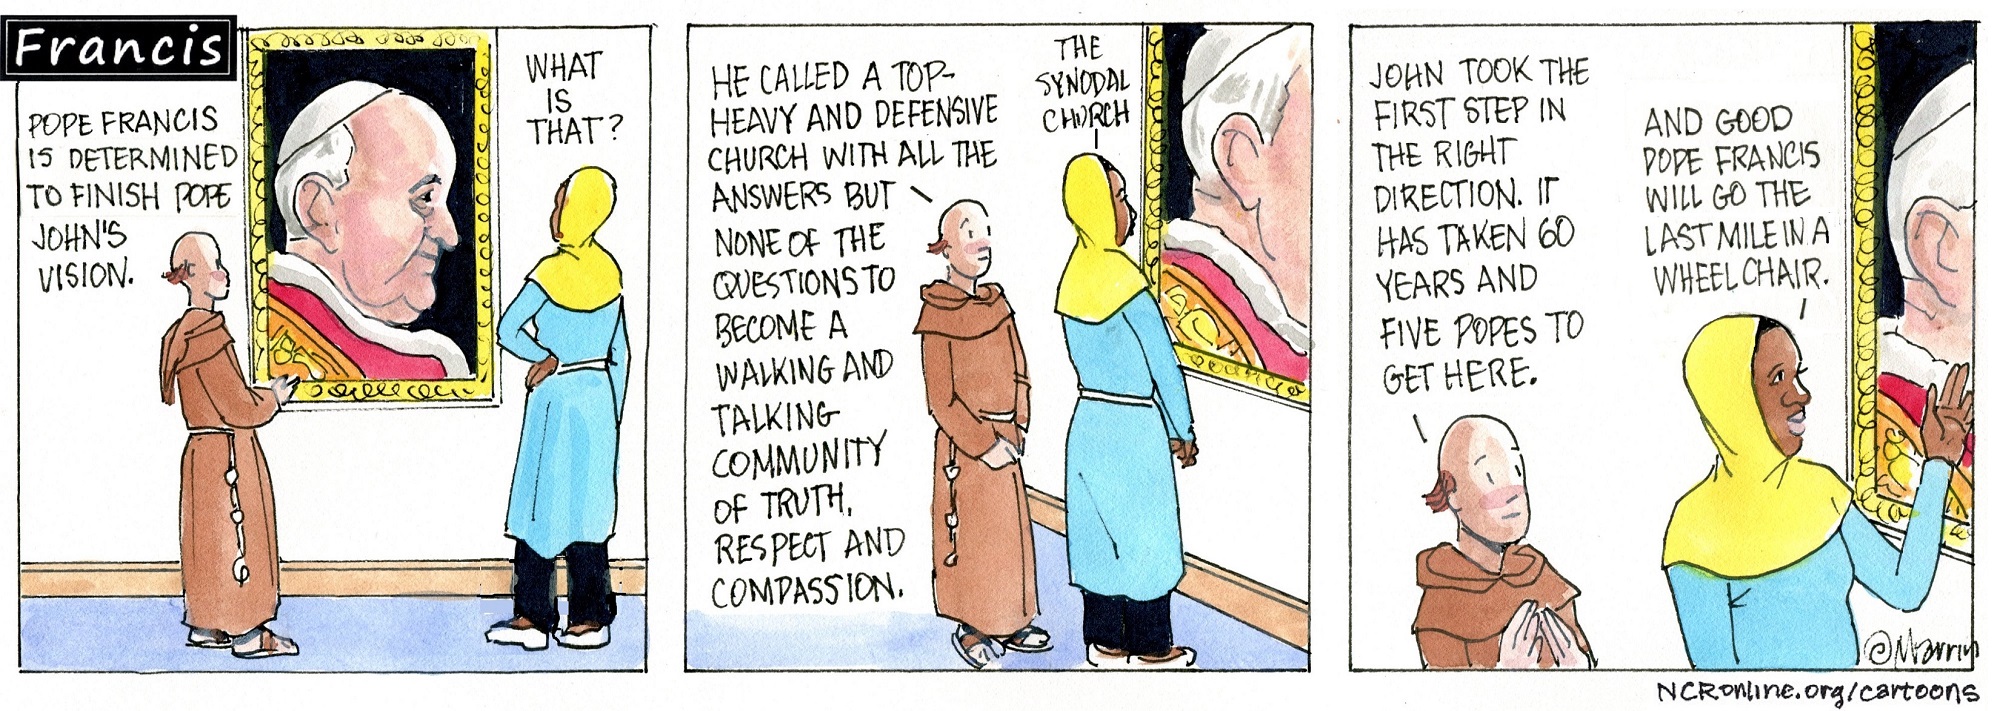 Francis, the comic strip: Brother Leo and Gabby discuss Francis' mission to continue John XXIII's vision. 